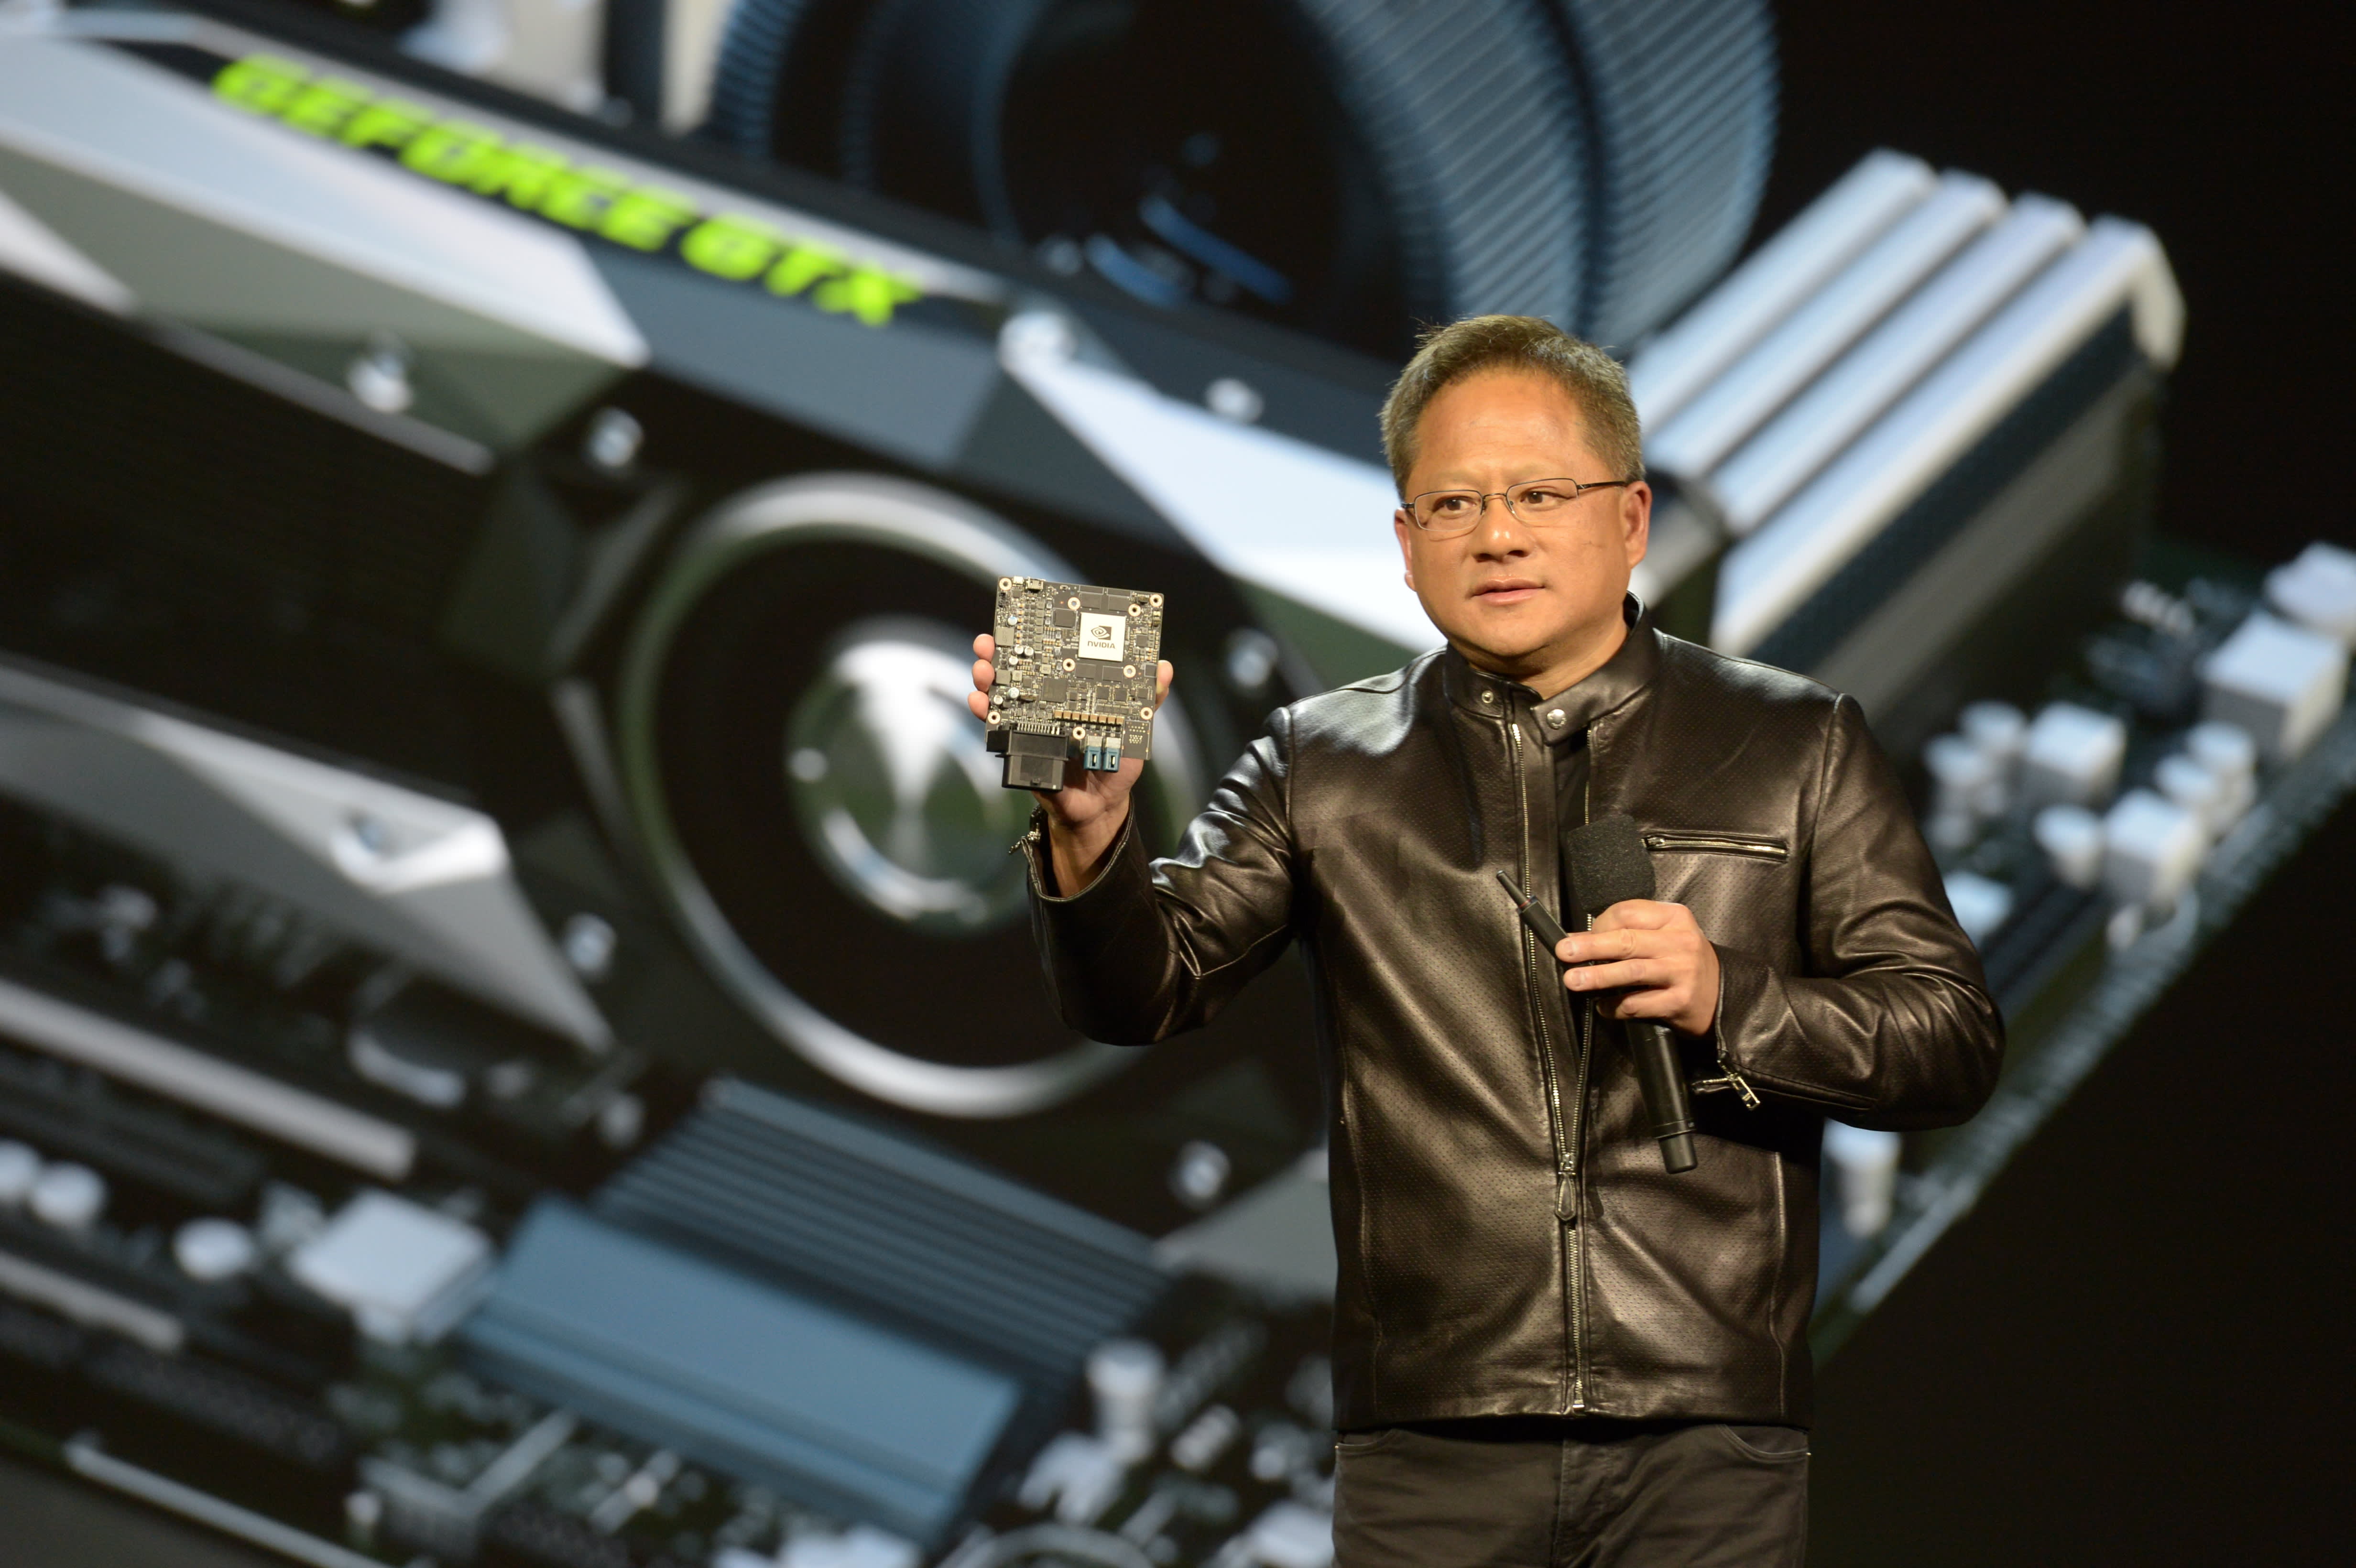 Nvidia has options to mitigate U.S. government restrictions on China chip sales